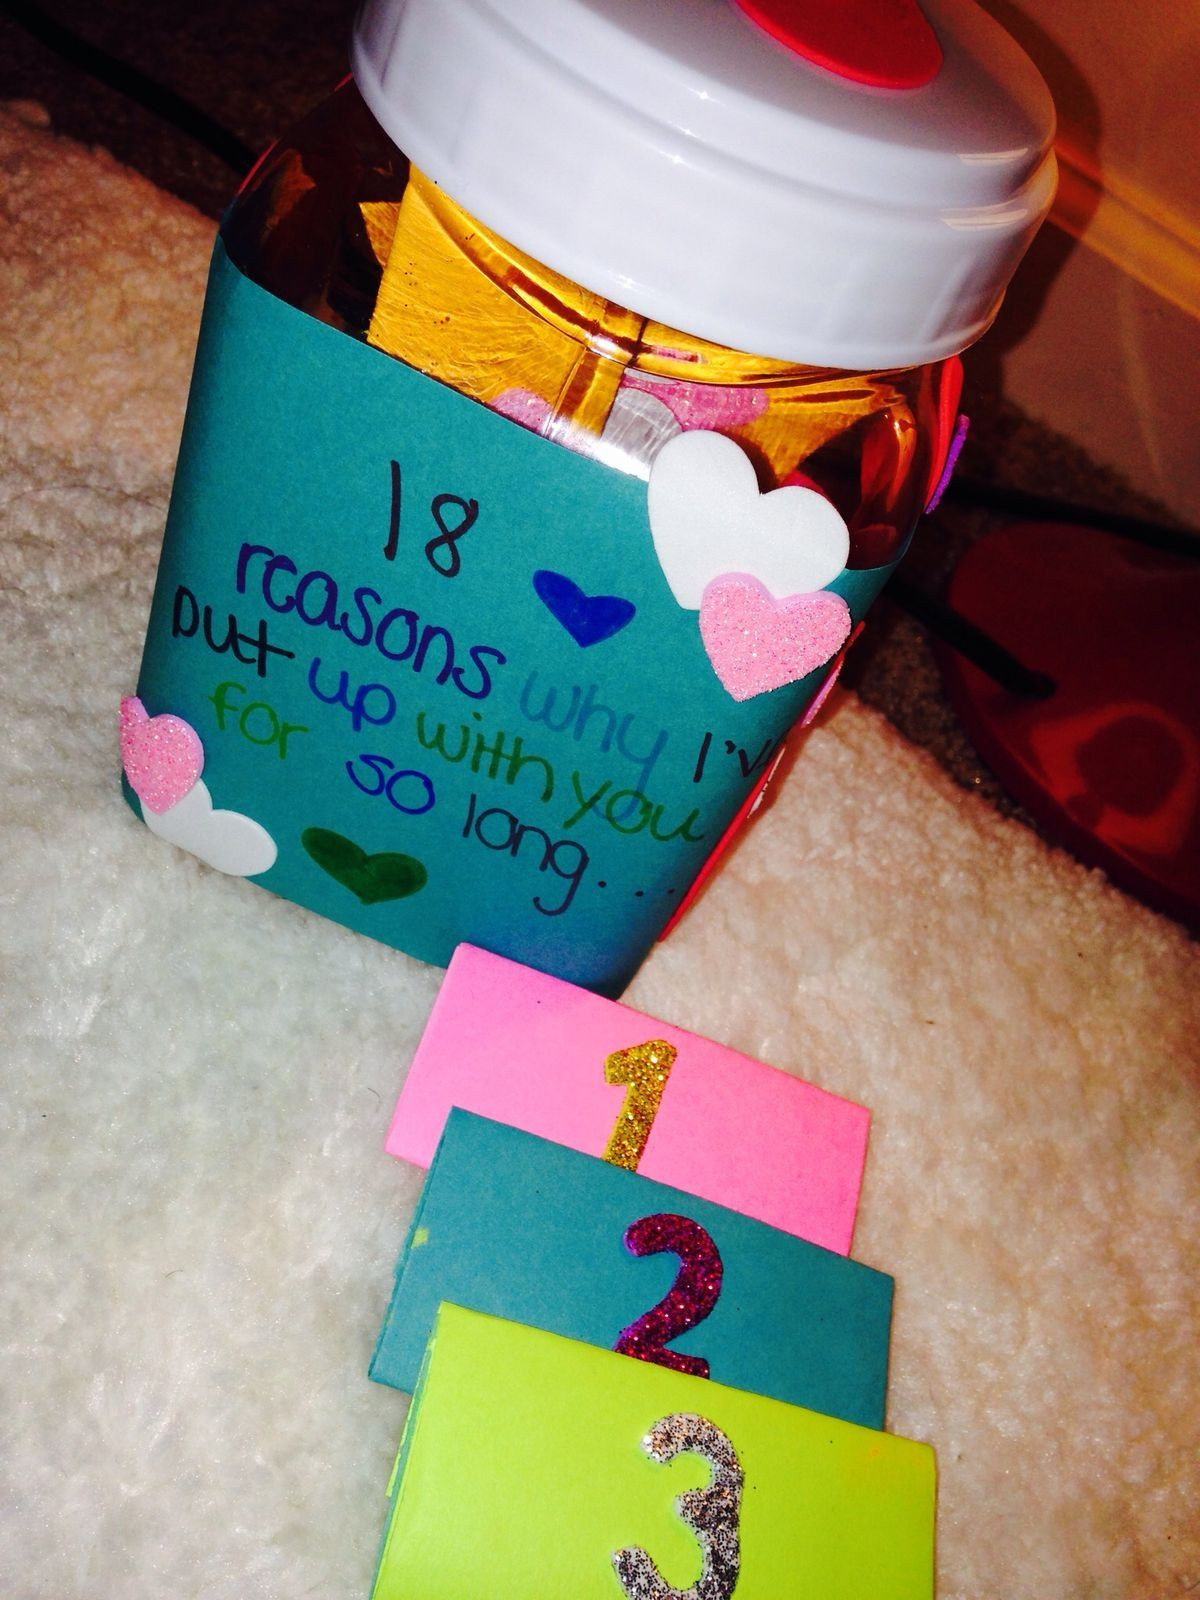 19Th Birthday Gift Ideas
 Doing this for my boyfriends 19th birthday but with 19